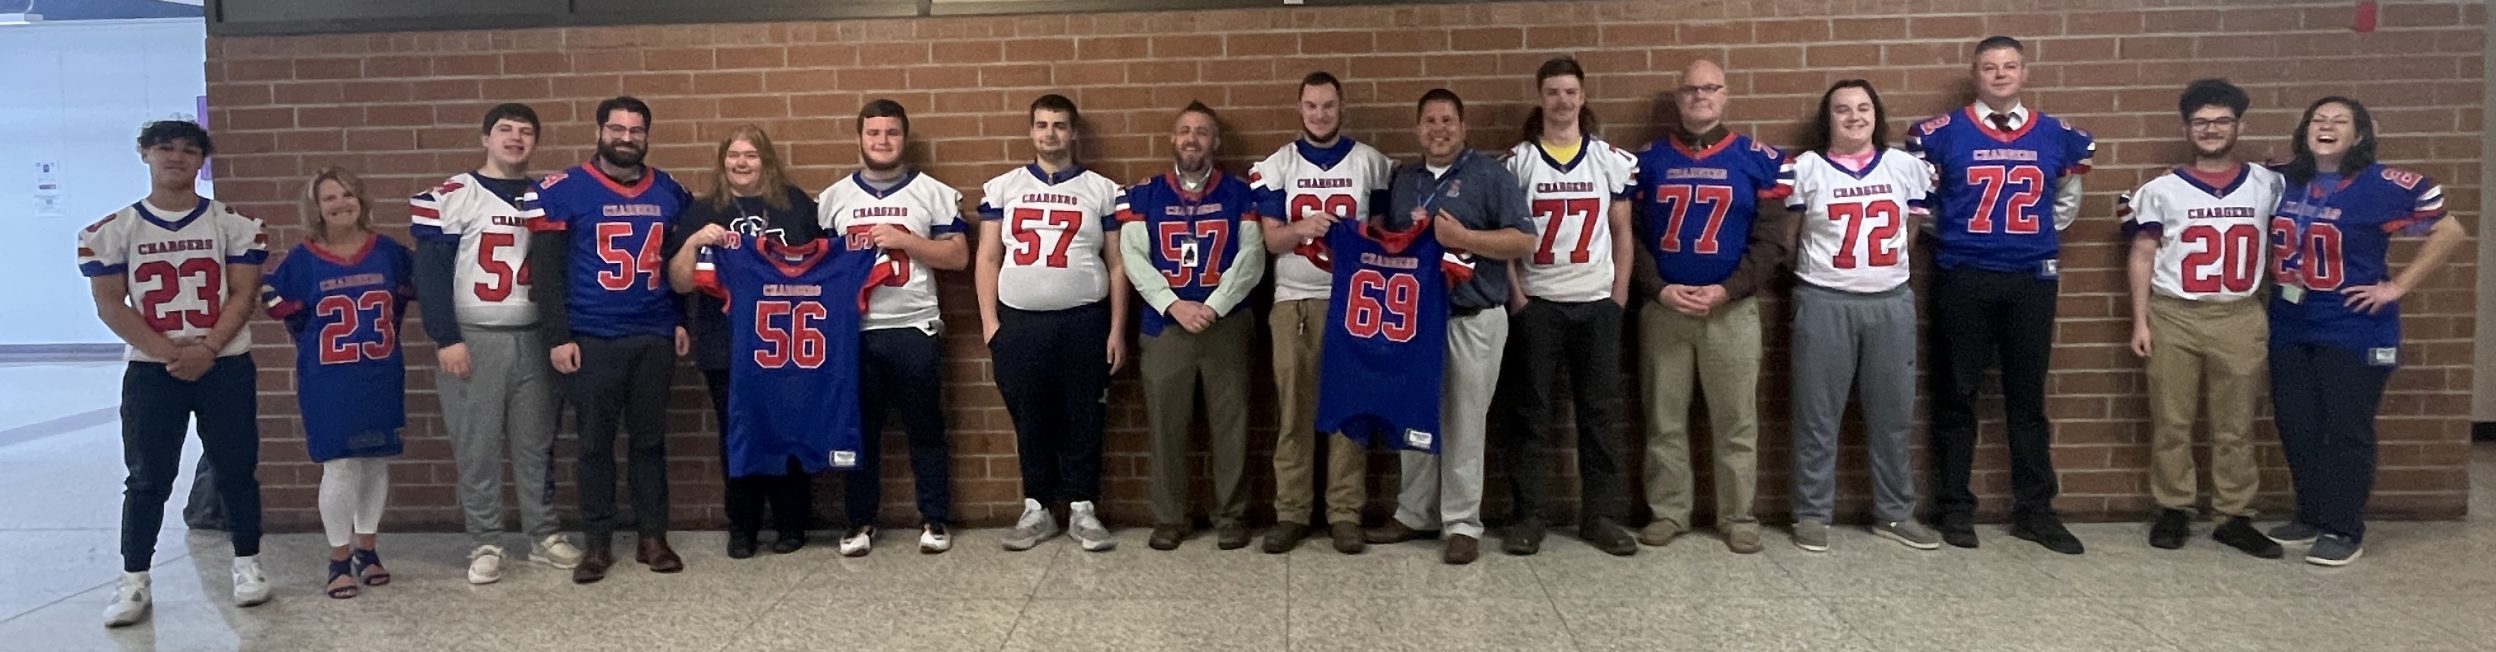 Charger Football Seniors Select Their Difference Makers